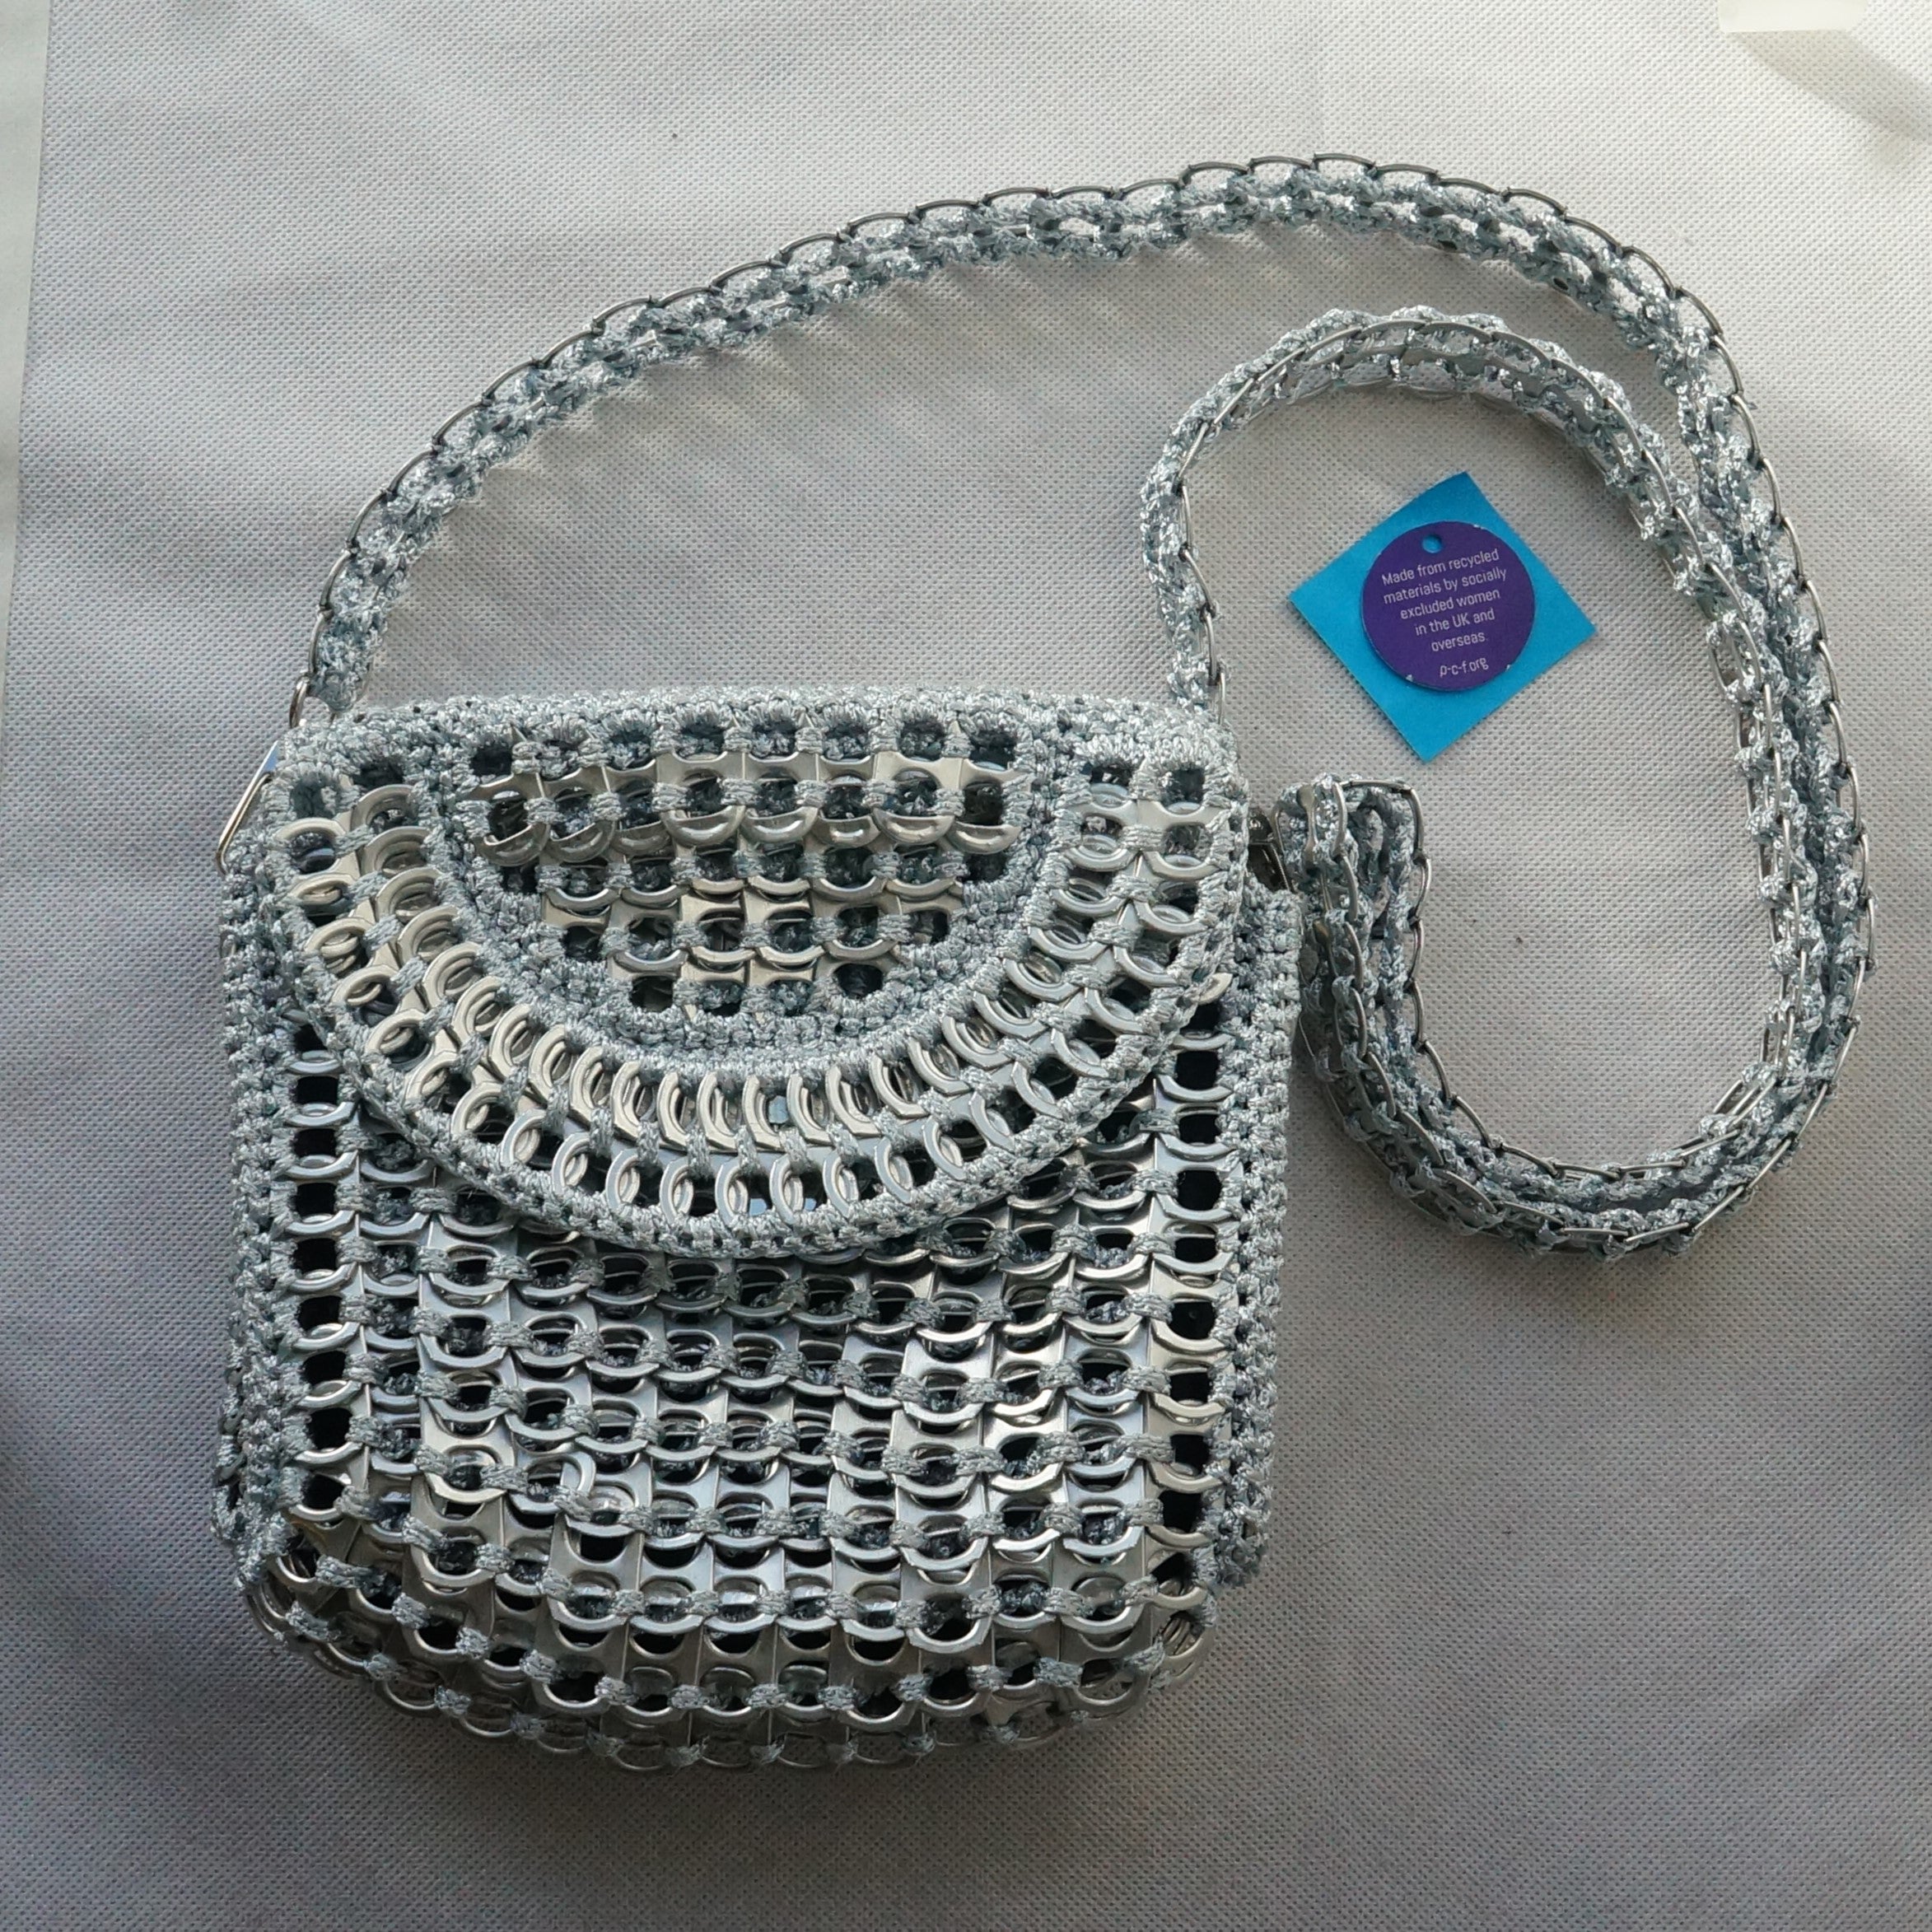 Metal Mickey Bag by Soda Pop - Handmade with Crocheted Ring-Pulls